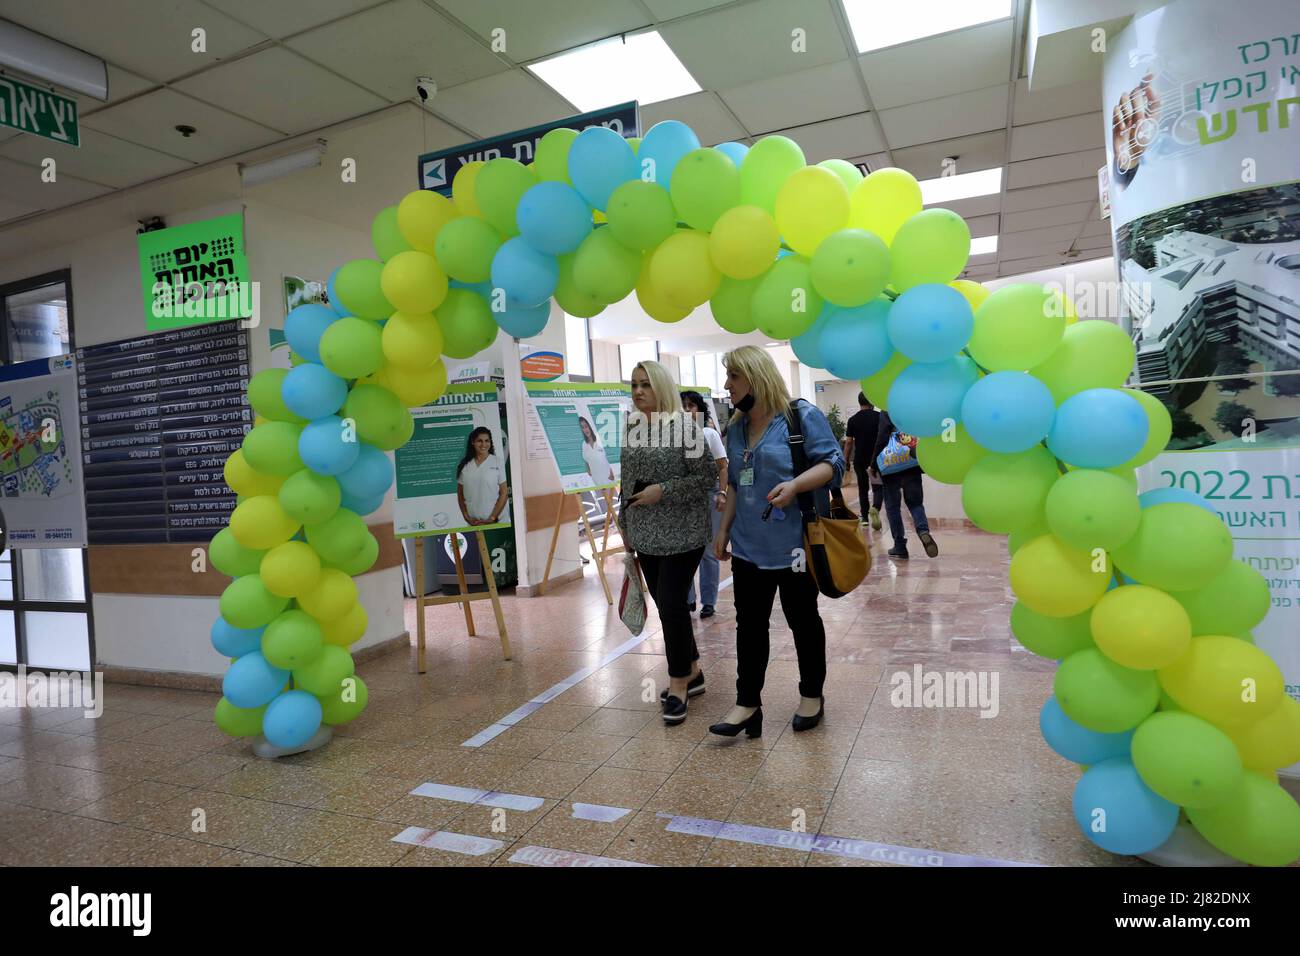 Rehovot, Israel. 11th May, 2022. An event celebrating the International Nurses Day is held at Kaplan Hospital in Rehovot, Israel, May 11, 2022. The International Nurses Day falls on May 12. Credit: Gil Cohen Magen/Xinhua/Alamy Live News Stock Photo